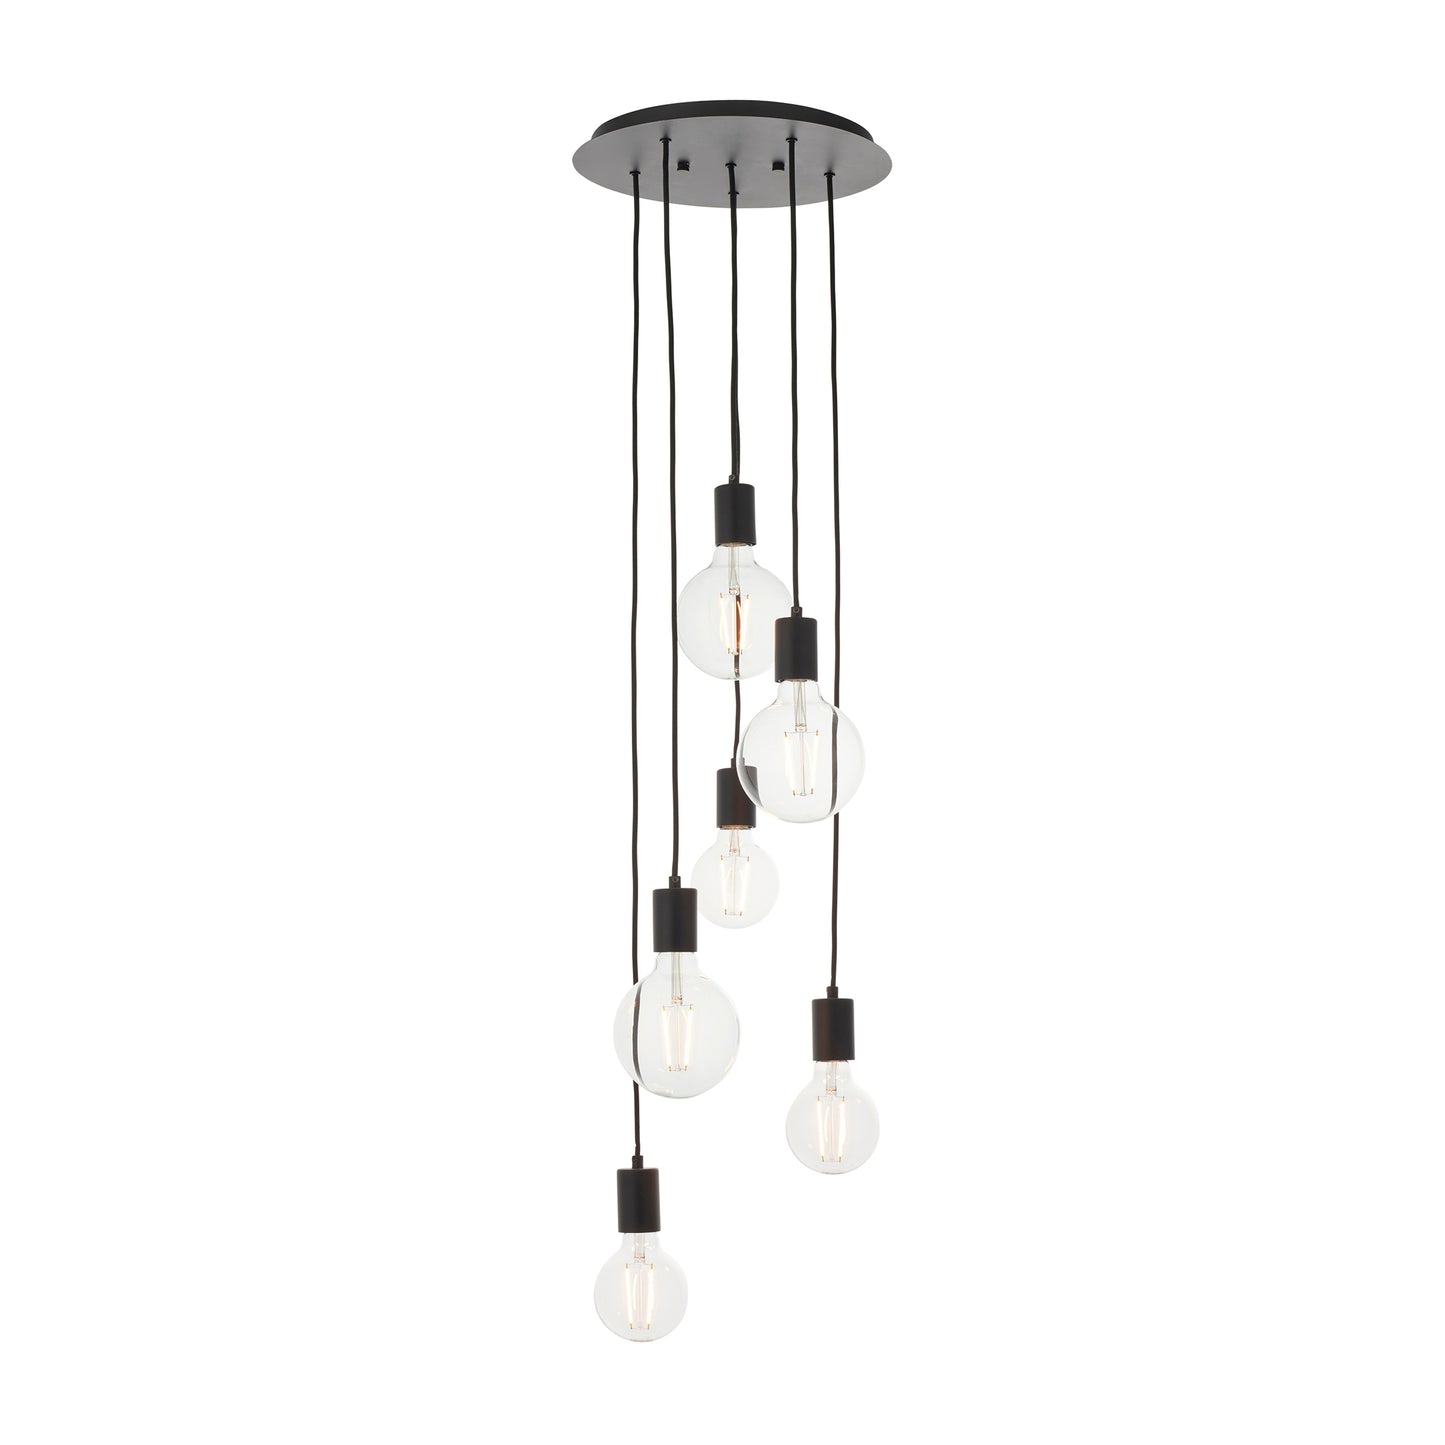 A Studio 6 Pendant Light Matt Black with five bulbs hanging from it, perfect for home furniture and interior decor by Kikiathome.co.uk.